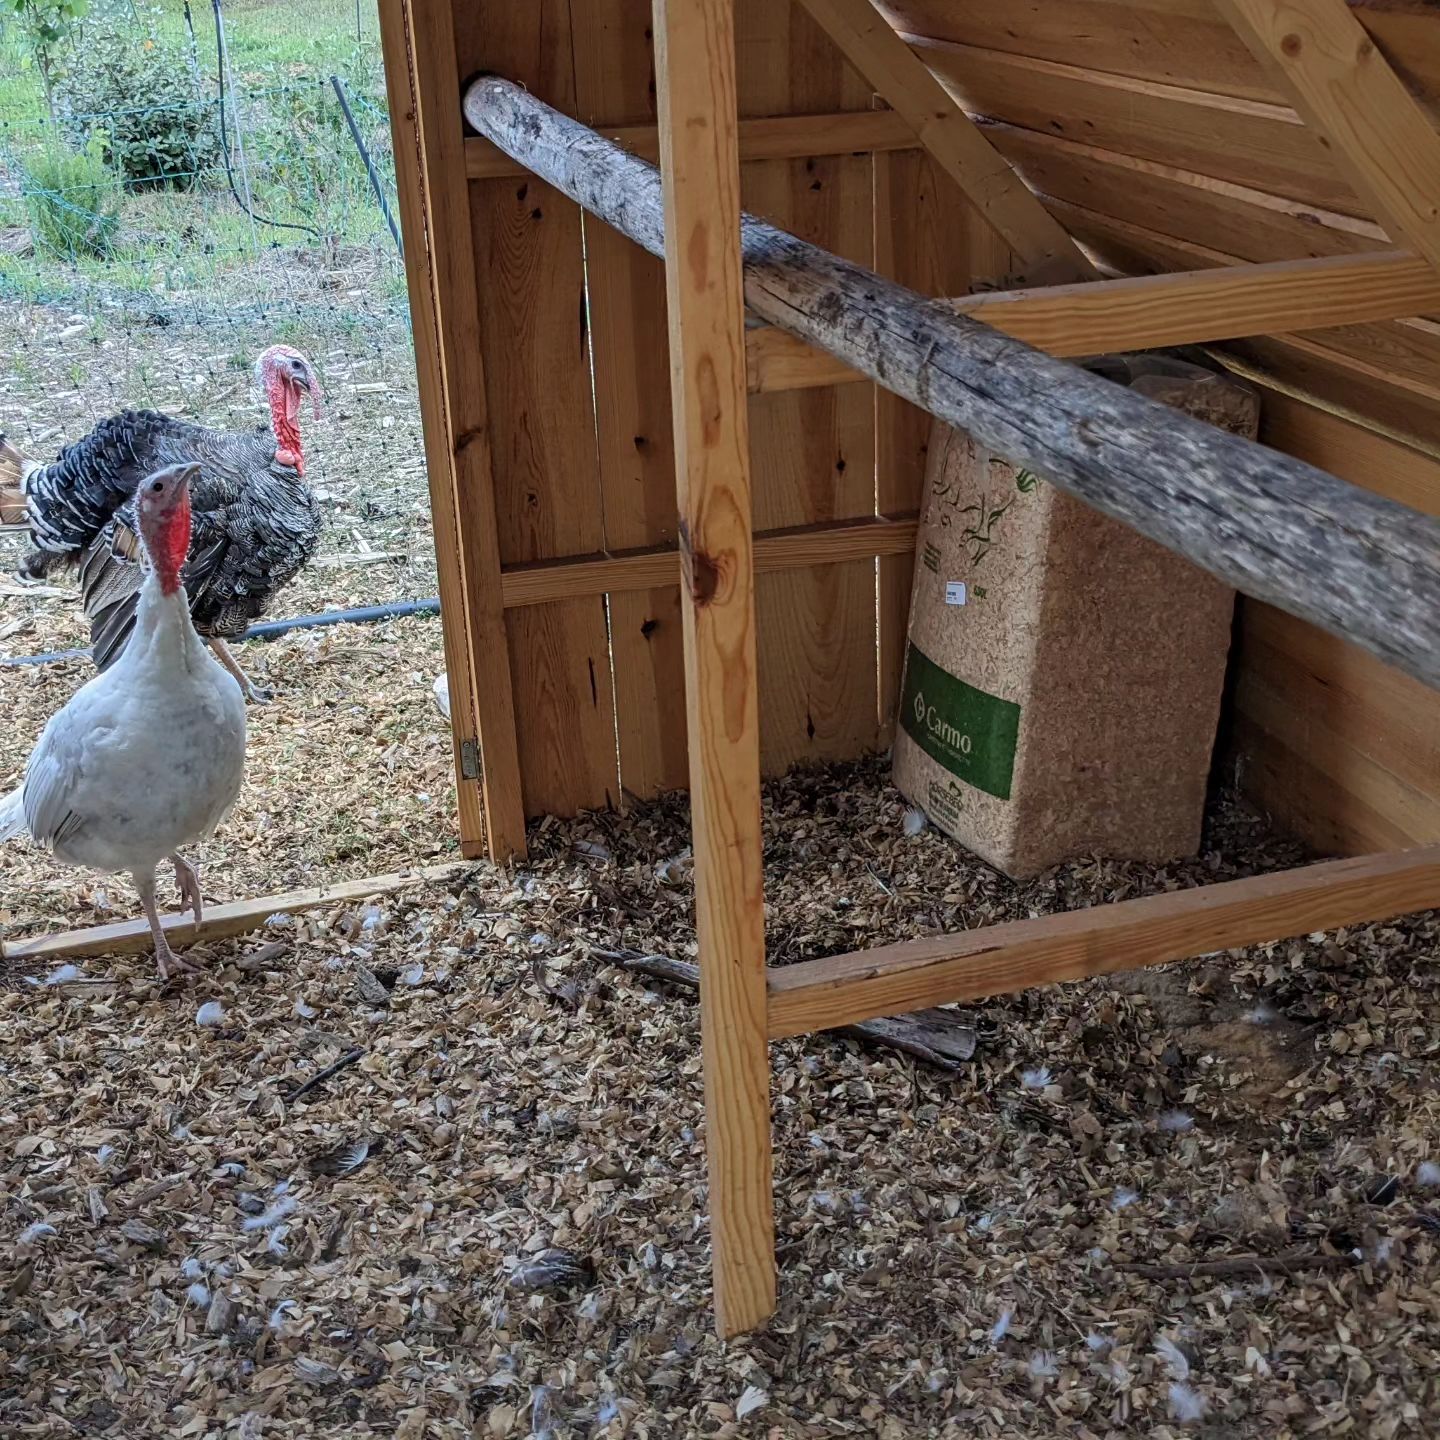 A new round roost for the turkeys